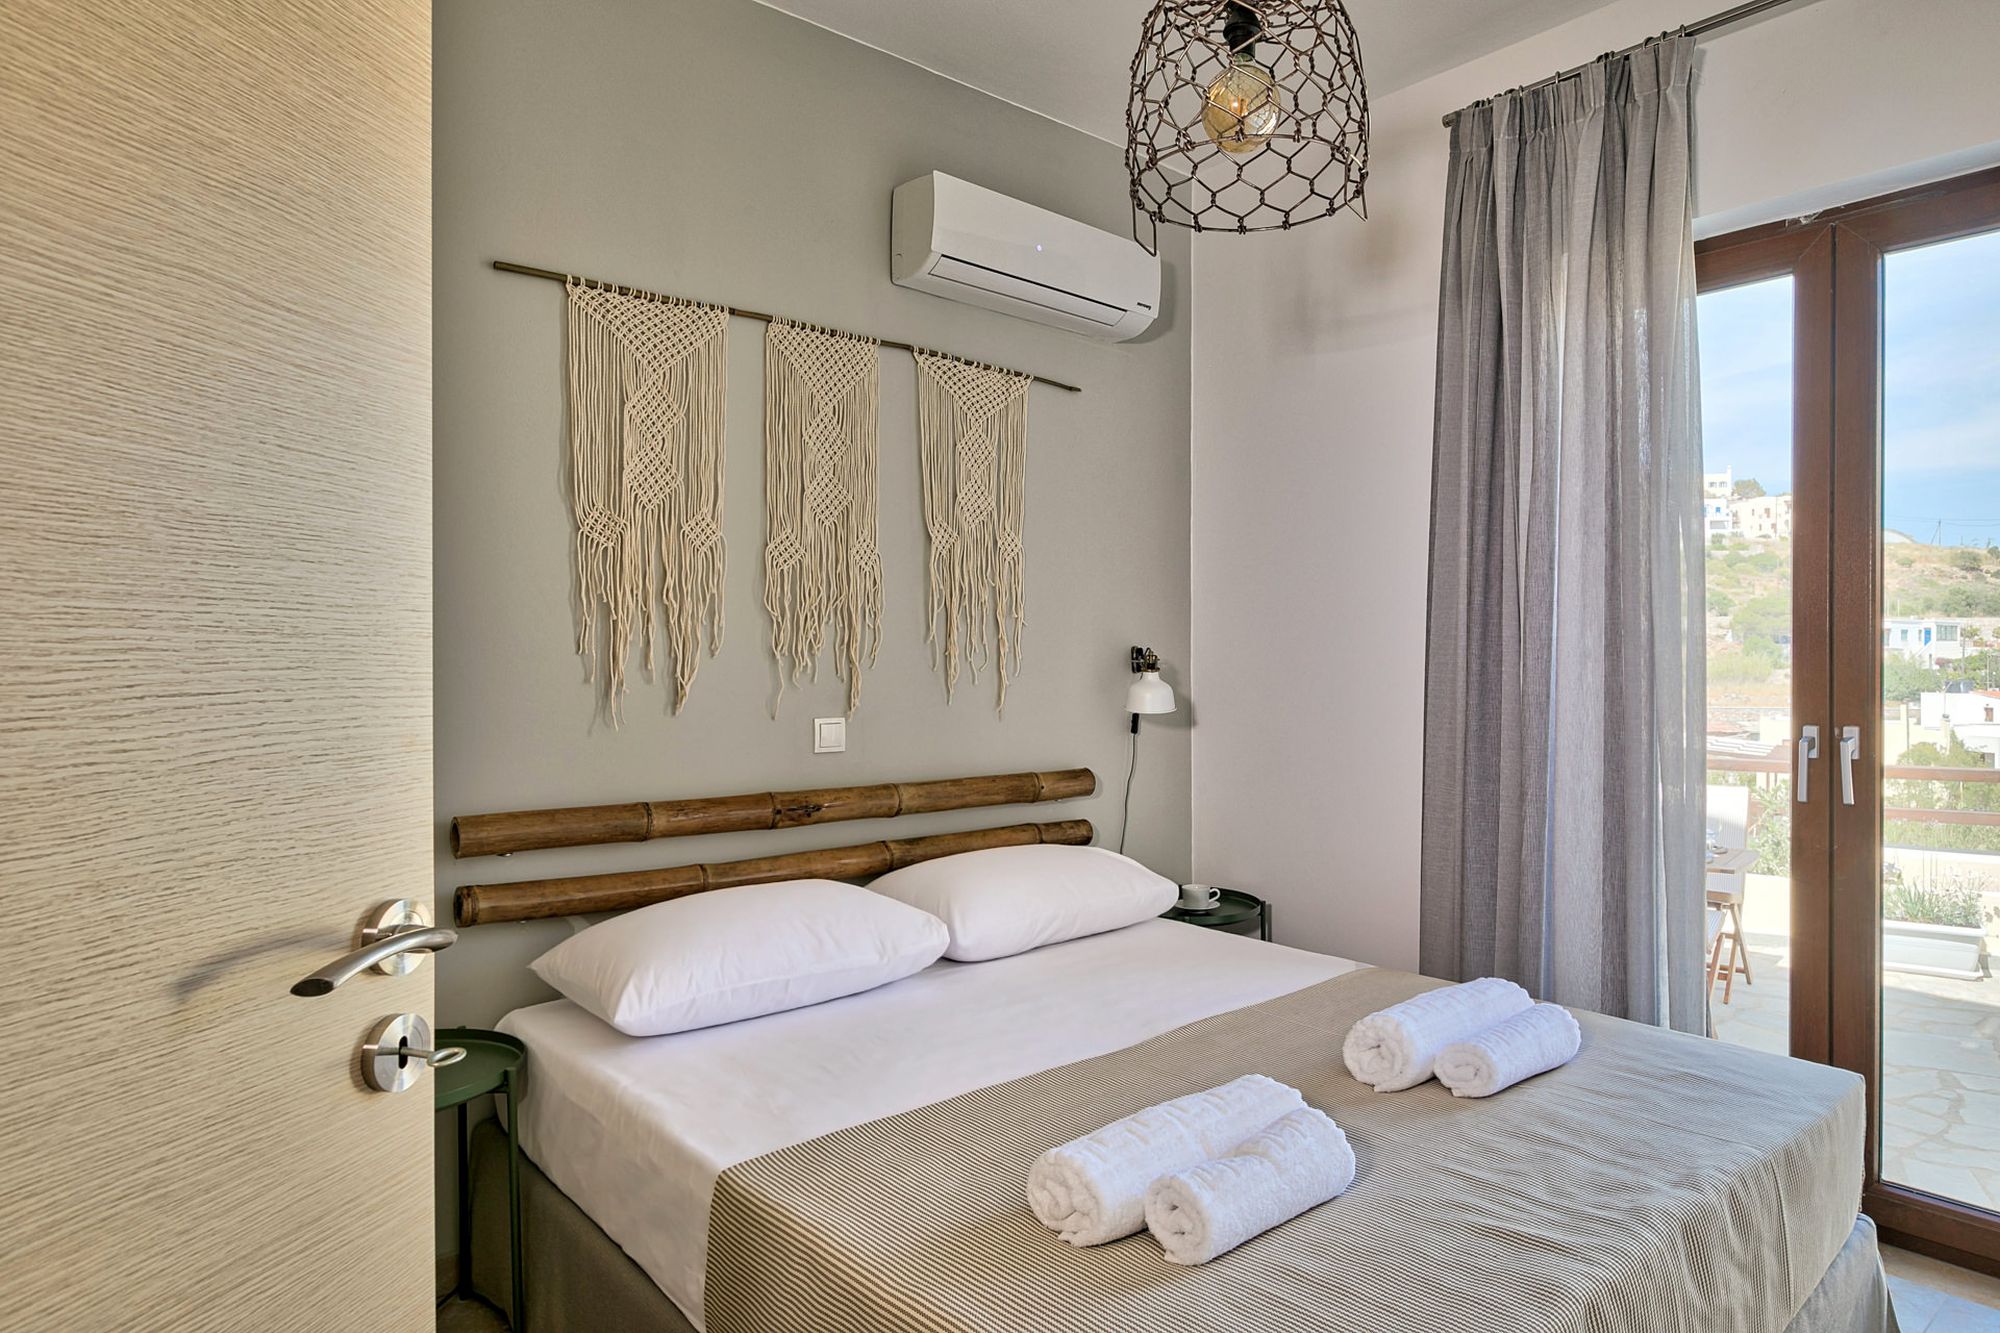 An air-conditioned bedroom with a double bed, wooden masts over the bed and a white macramé on the wall.